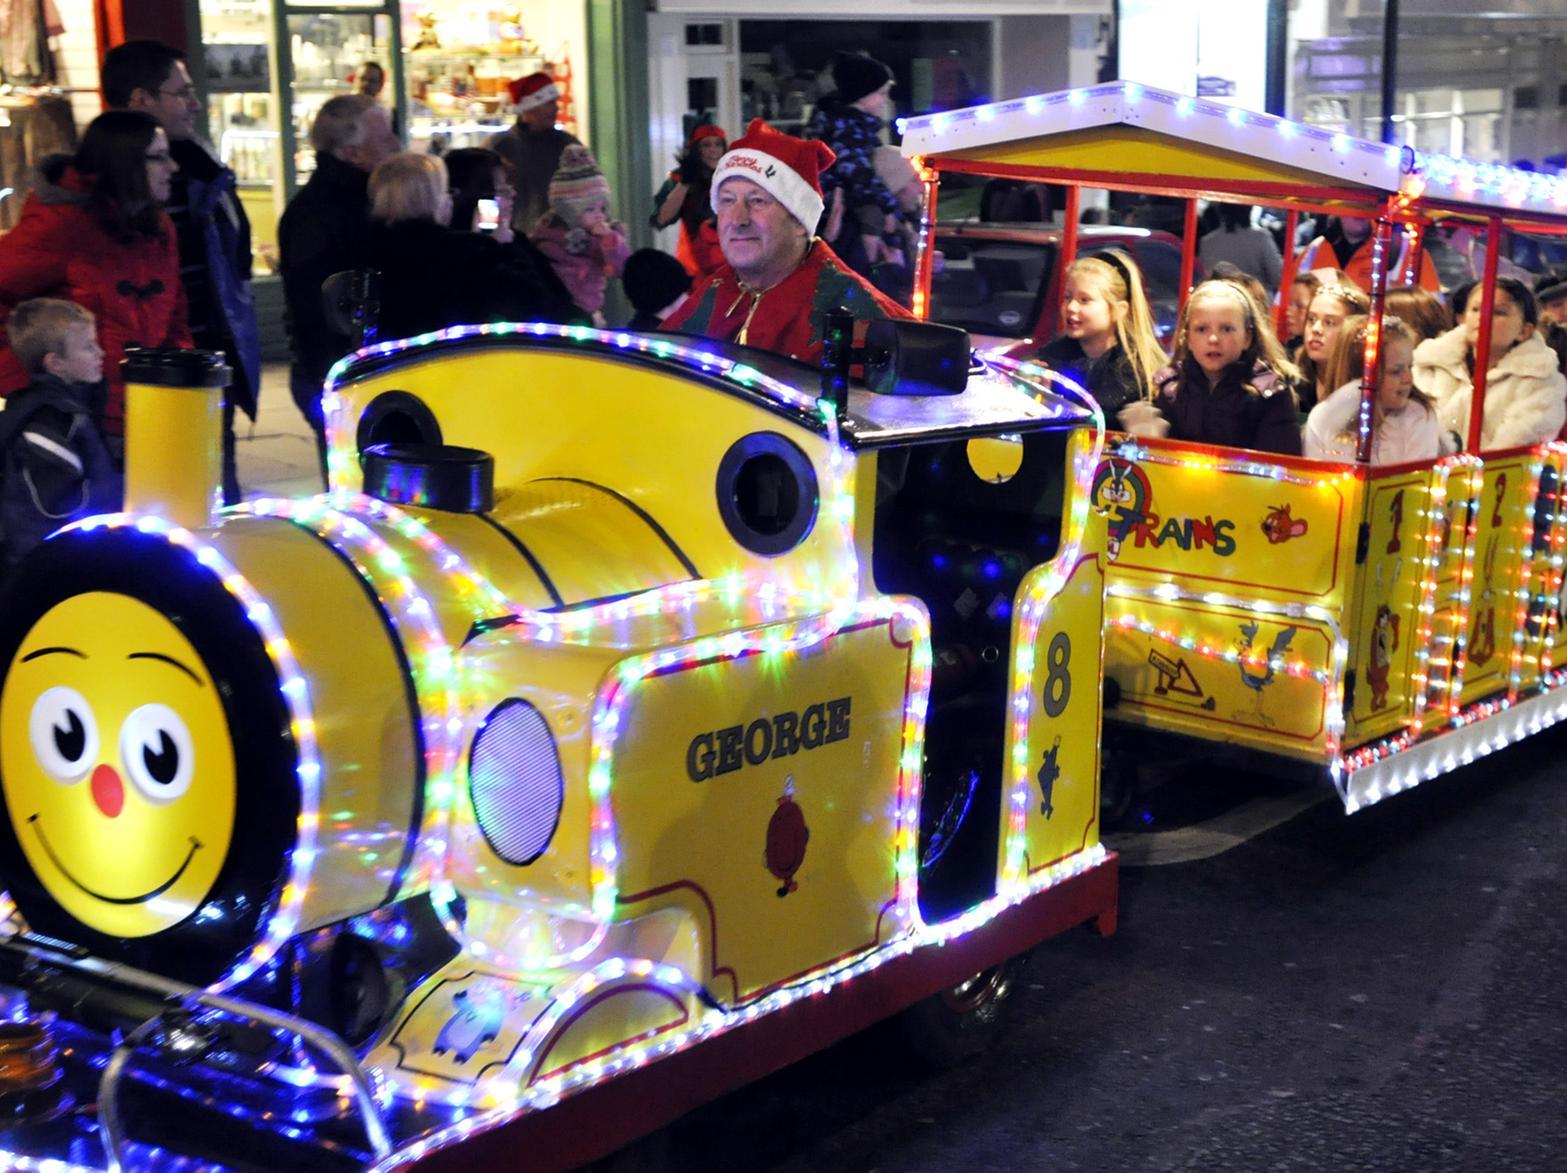 The little land train gives residents a lift.